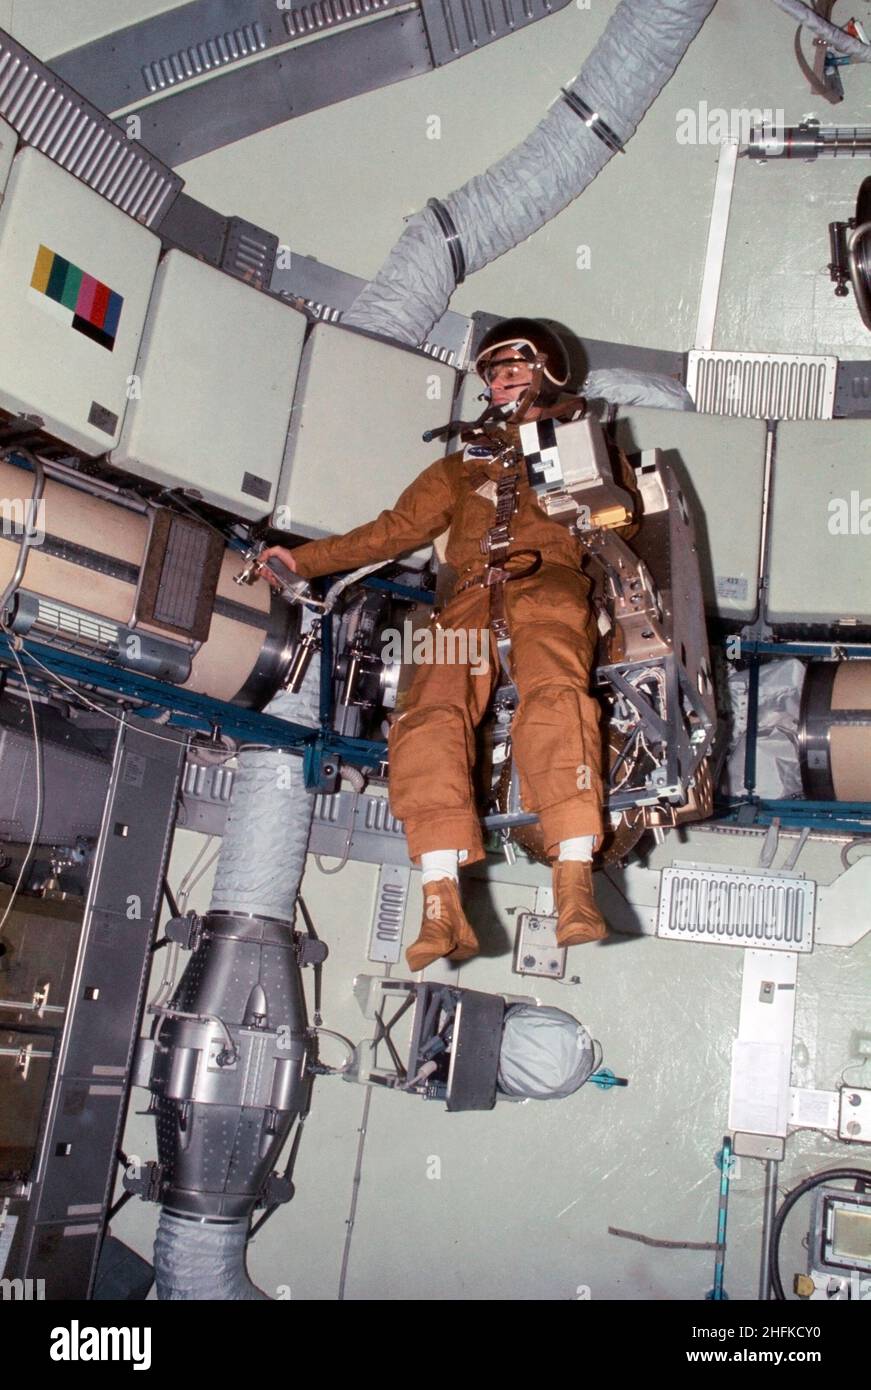 (27 Aug. 1973) --- Astronaut Alan L. Bean, Skylab 3 commander, flies the M509 Astronaut Maneuvering Equipment in the forward dome area of the Orbital Workshop (OWS) on the space station cluster in Earth orbit. One of his fellow crewmen took this photograph with a 35mm Nikon camera. Bean is strapped into the back mounted, hand-controlled Automatically Stabilized Maneuvering Unit (ASMU). The dome area is about 22 feet in diameter and 19 feet from top to bottom Stock Photo